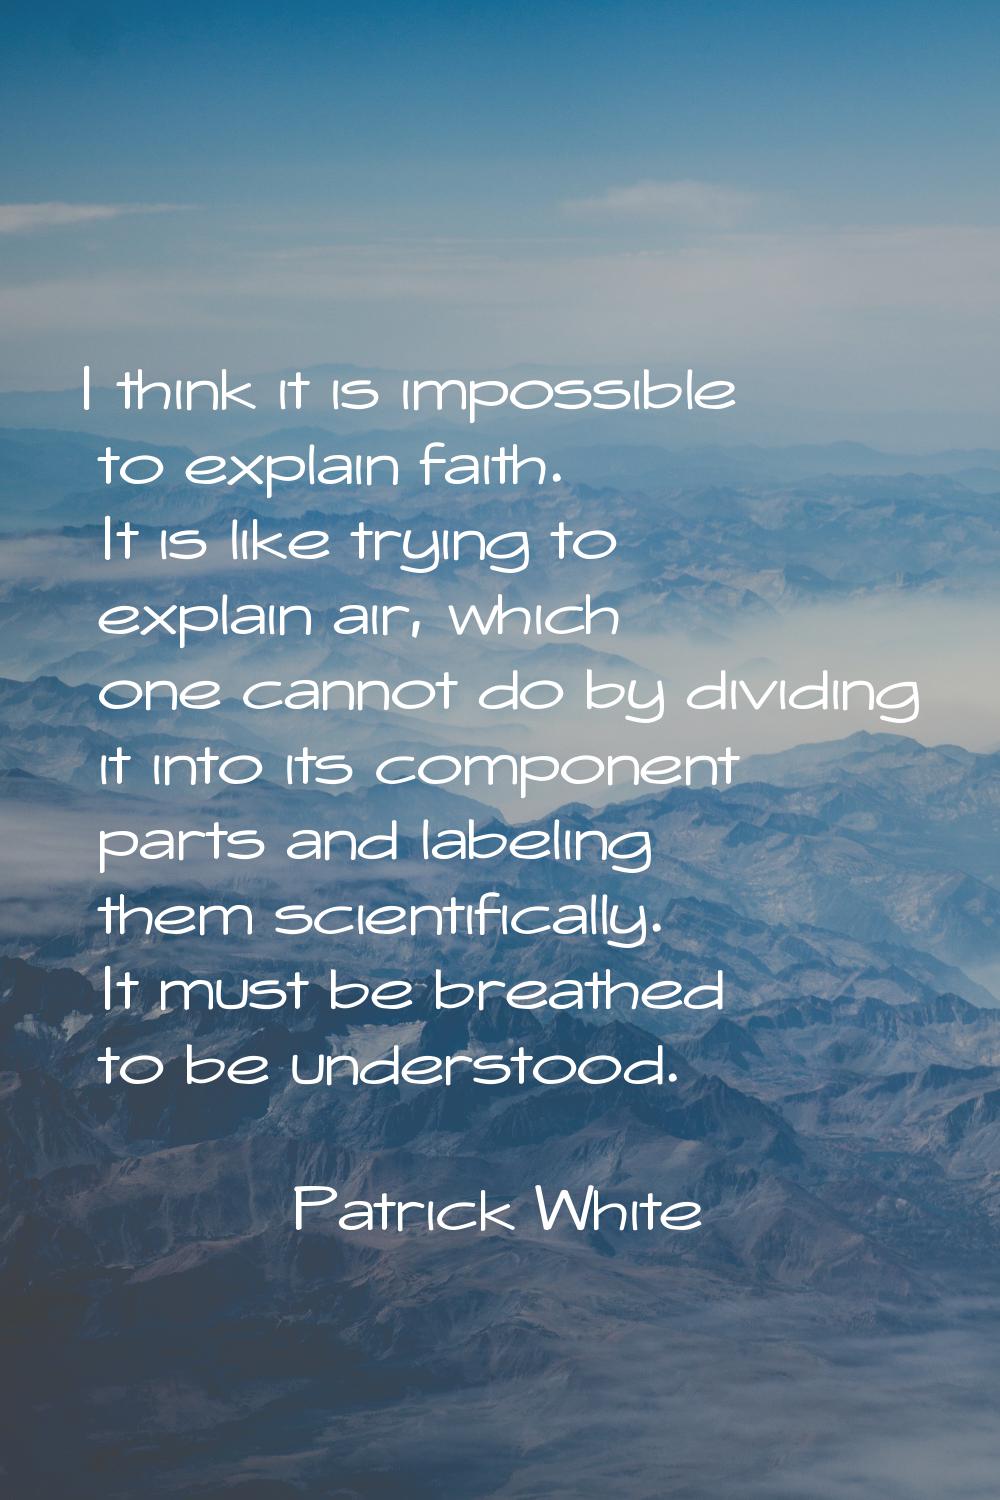 I think it is impossible to explain faith. It is like trying to explain air, which one cannot do by